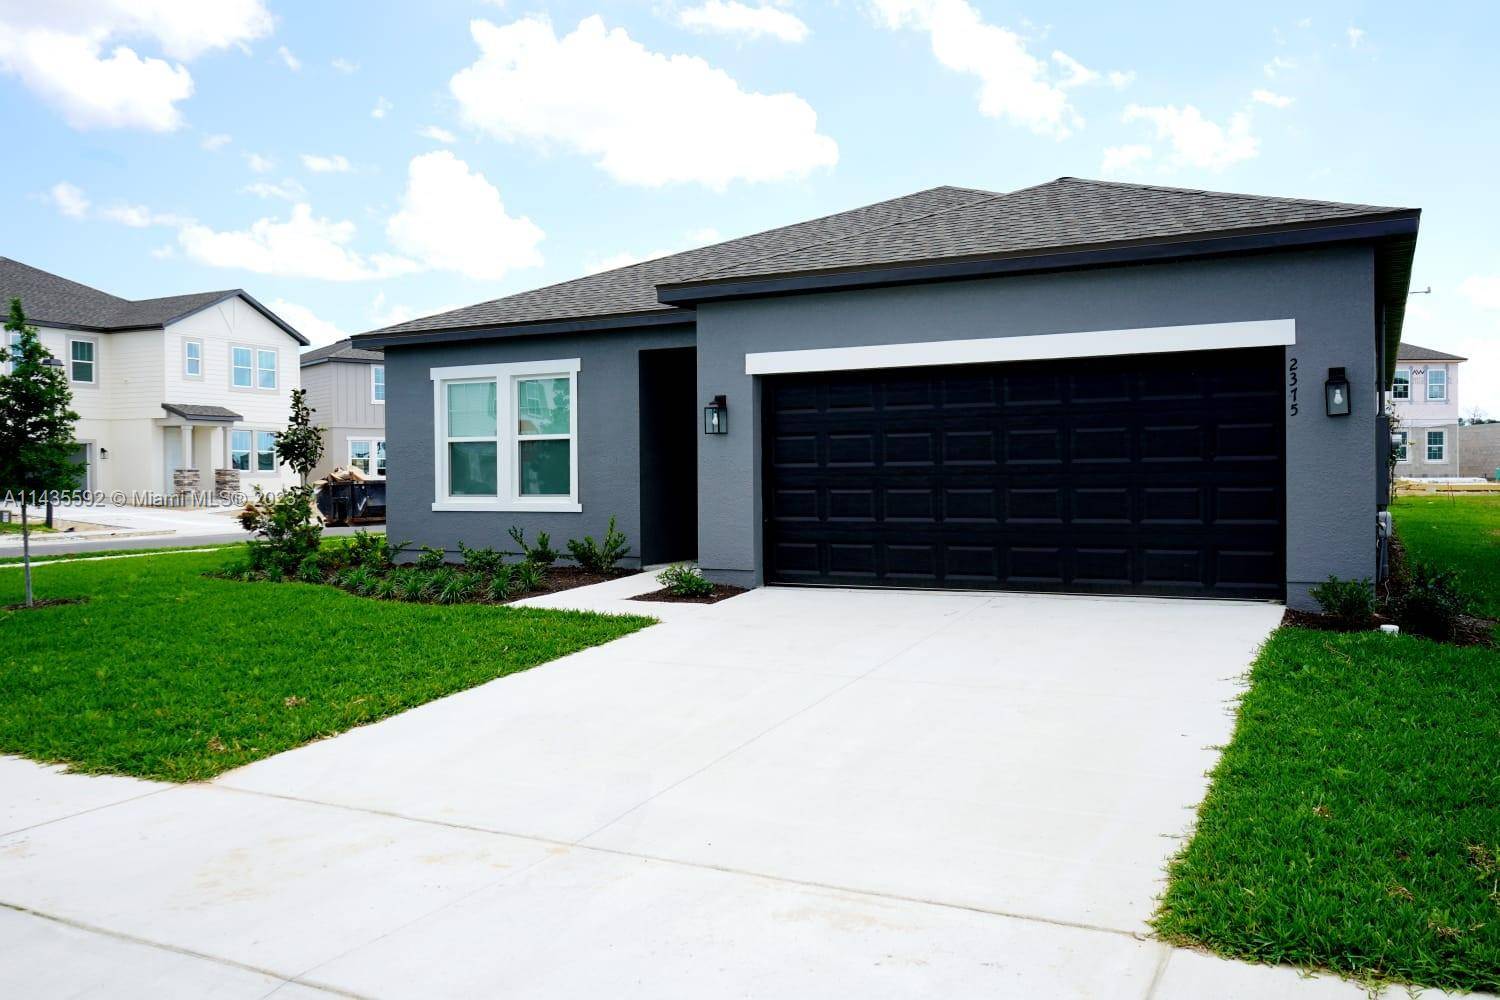 New in Davenport, FL ! Available for rent, a newly constructed gem this 4 bedroom, 2 bathroom property blends contemporary design with comfort and functionality.